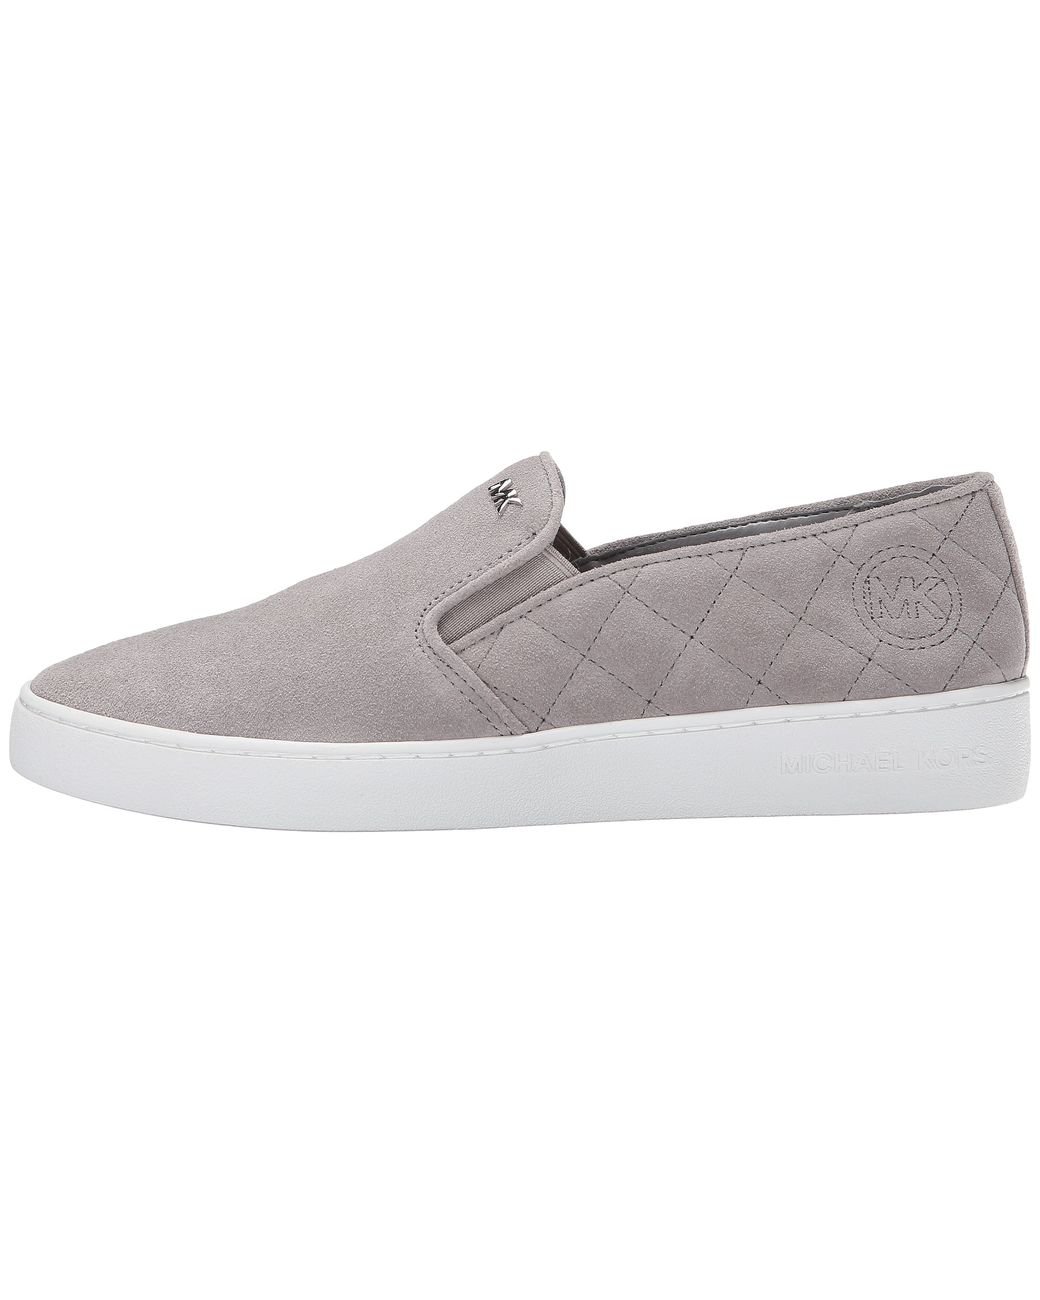 MICHAEL Michael Kors Keaton Quilted Slip-on in Gray | Lyst